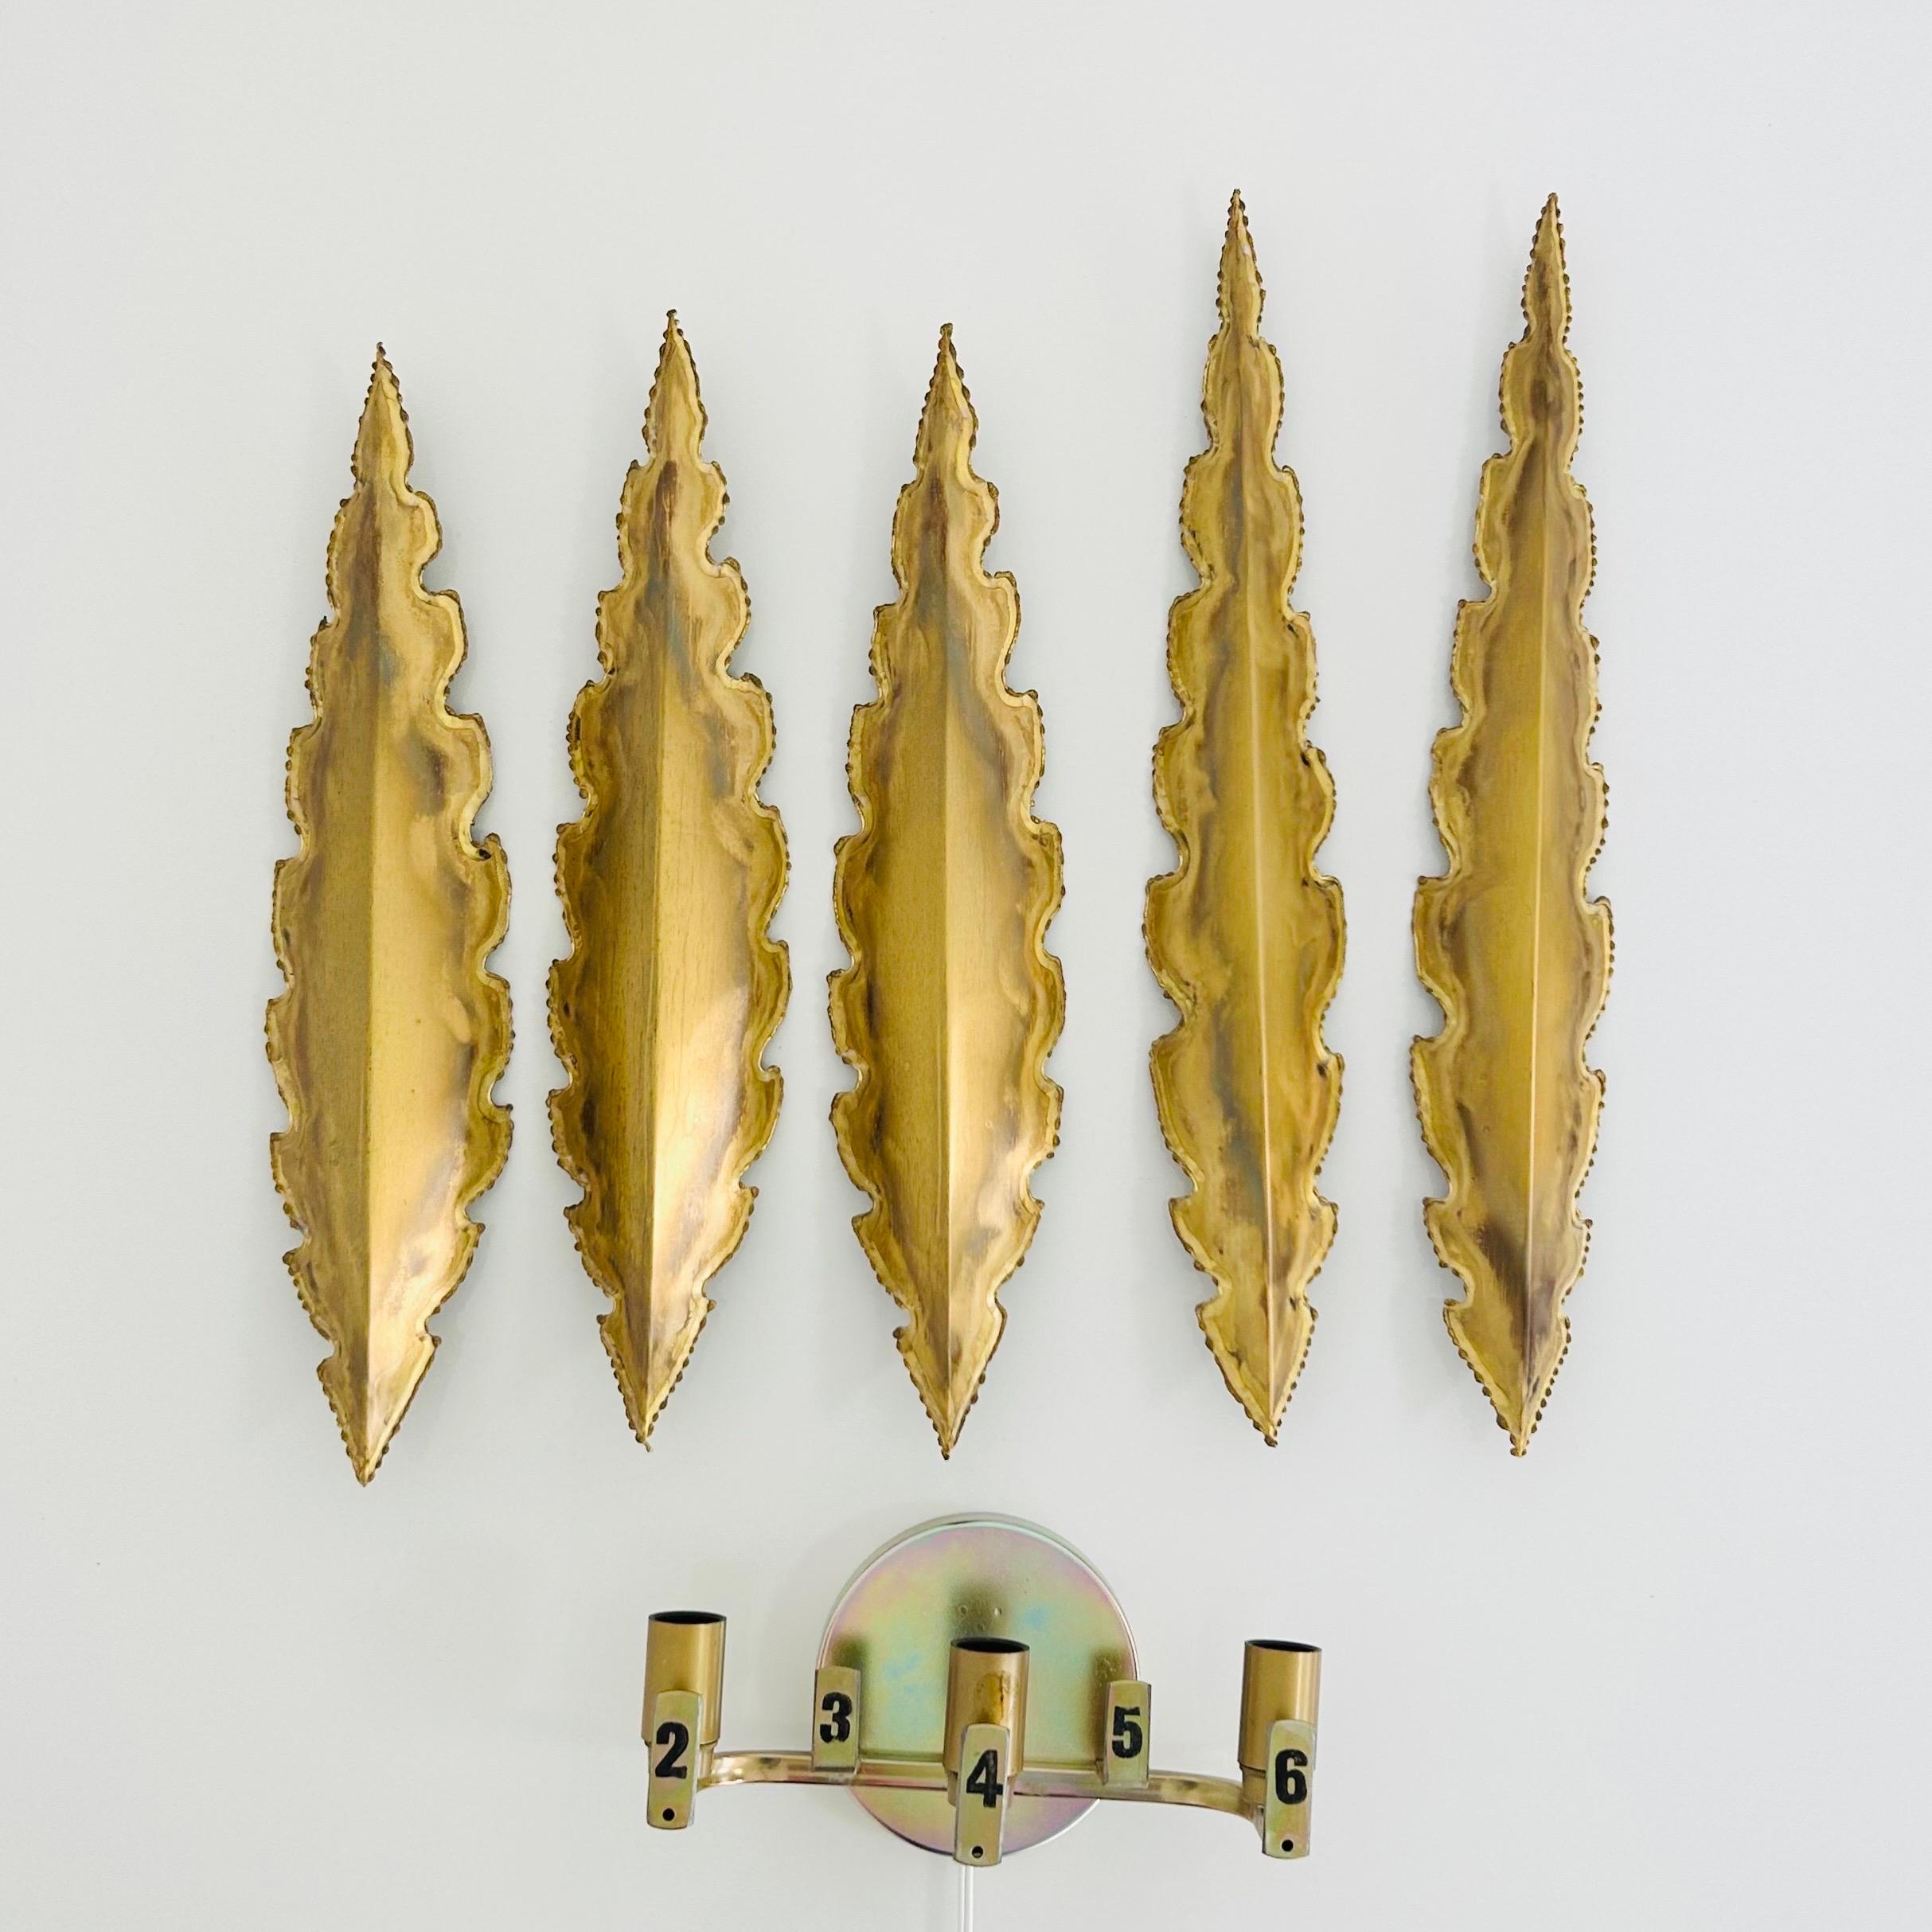 Pair of Large Brass Wall Lamps by Svend Aage Holm Sorensen, 1960s, Denmark For Sale 1